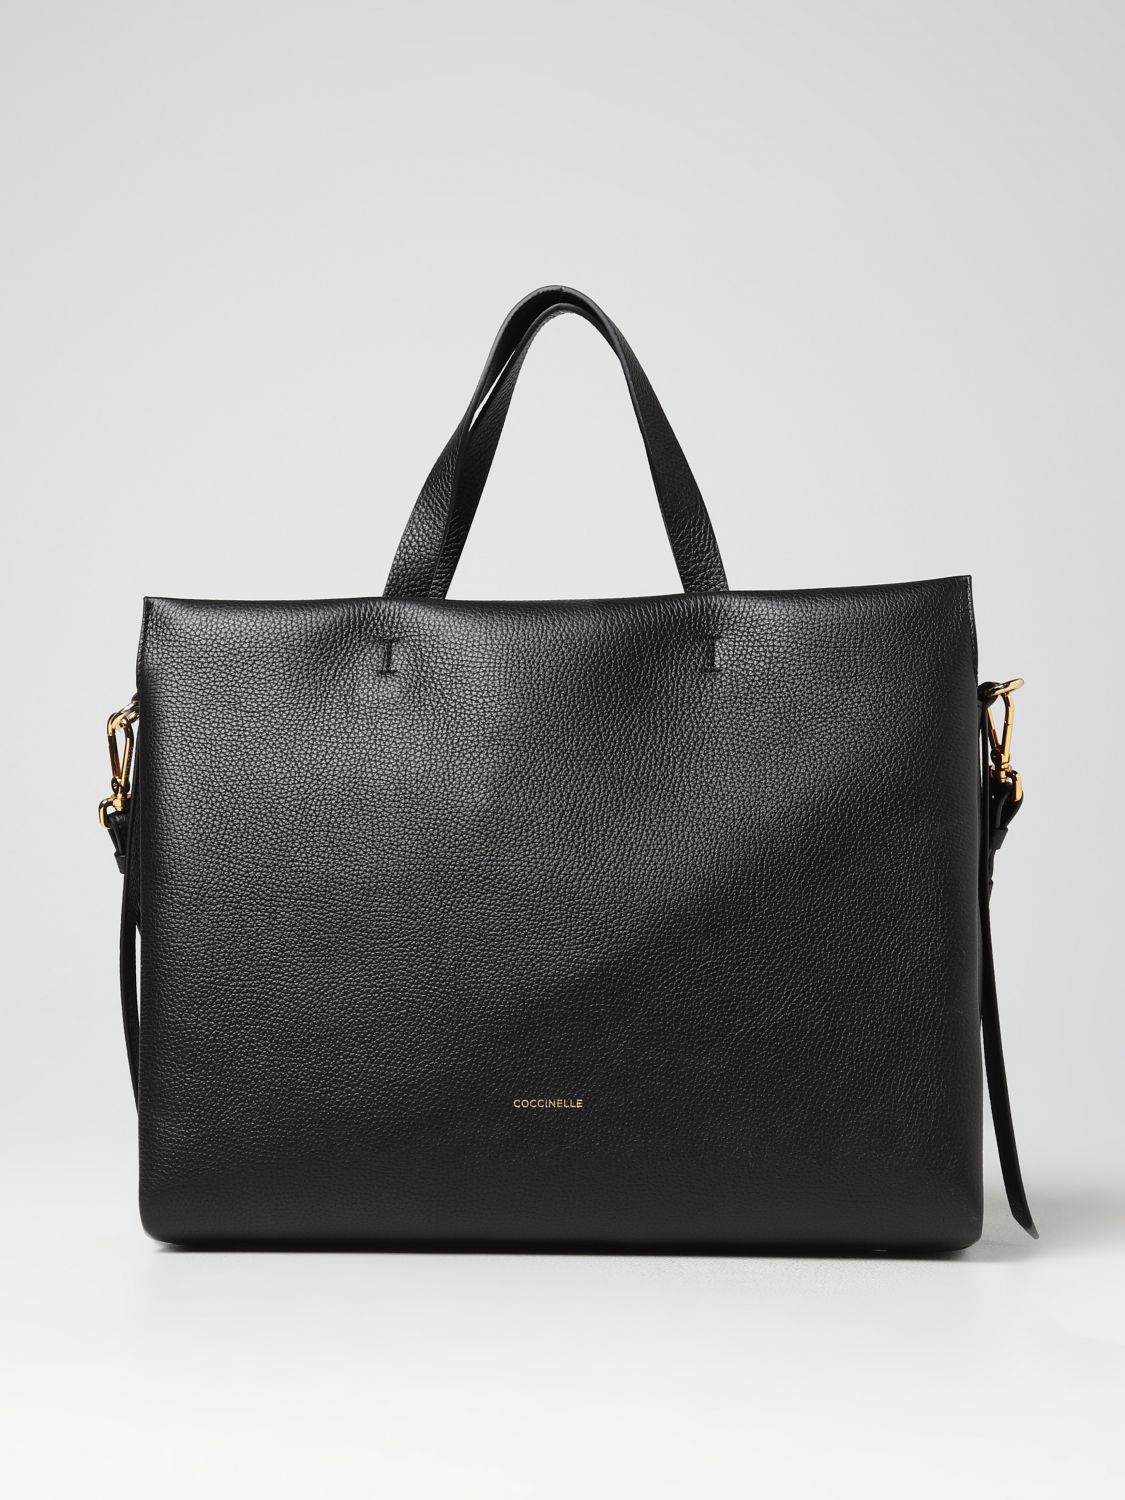 COCCINELLE: tote bags for woman - Black | Coccinelle tote bags ...